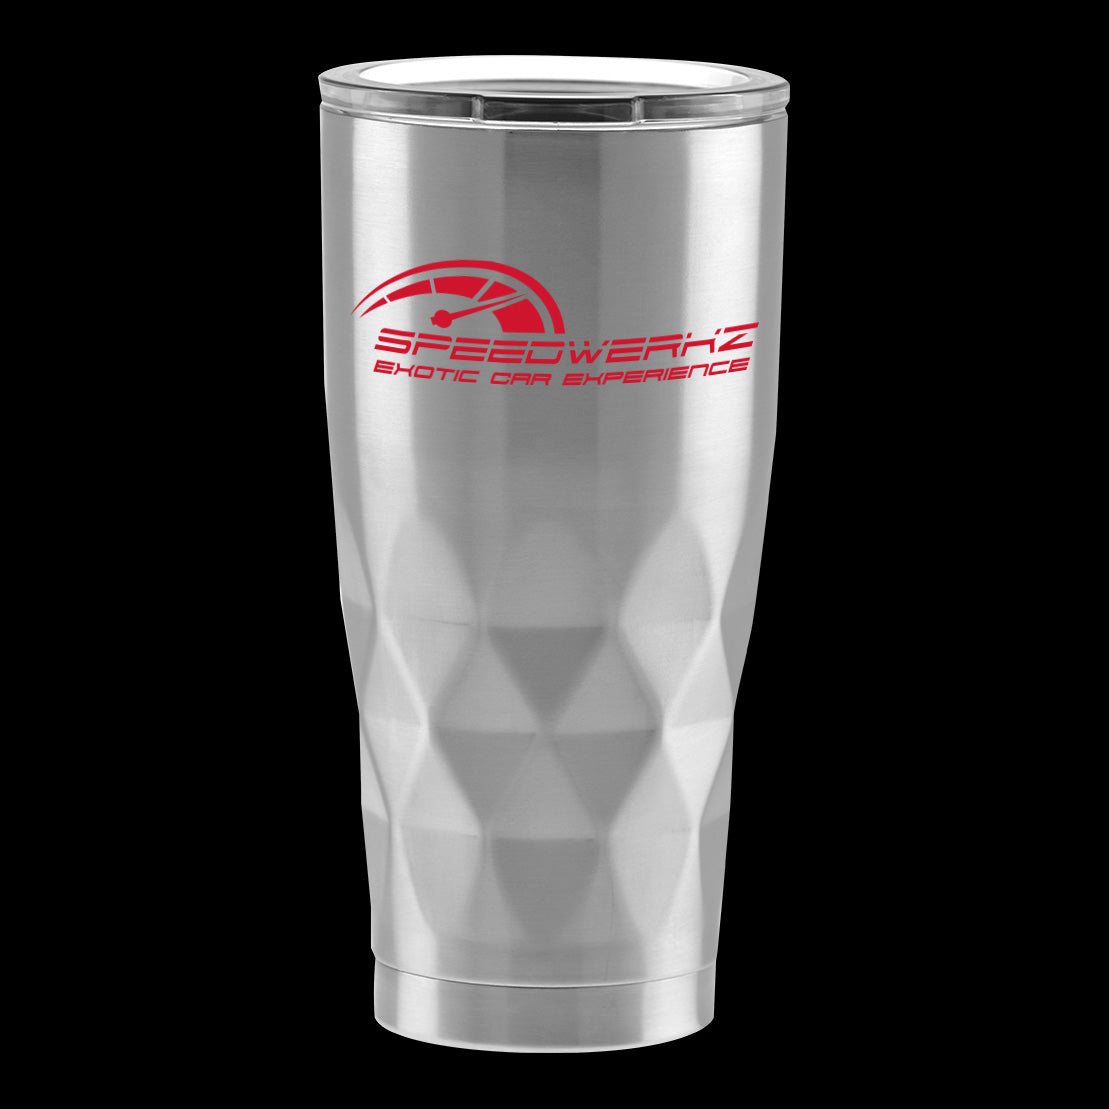 silver Speedwerkz tumbler with a red logo